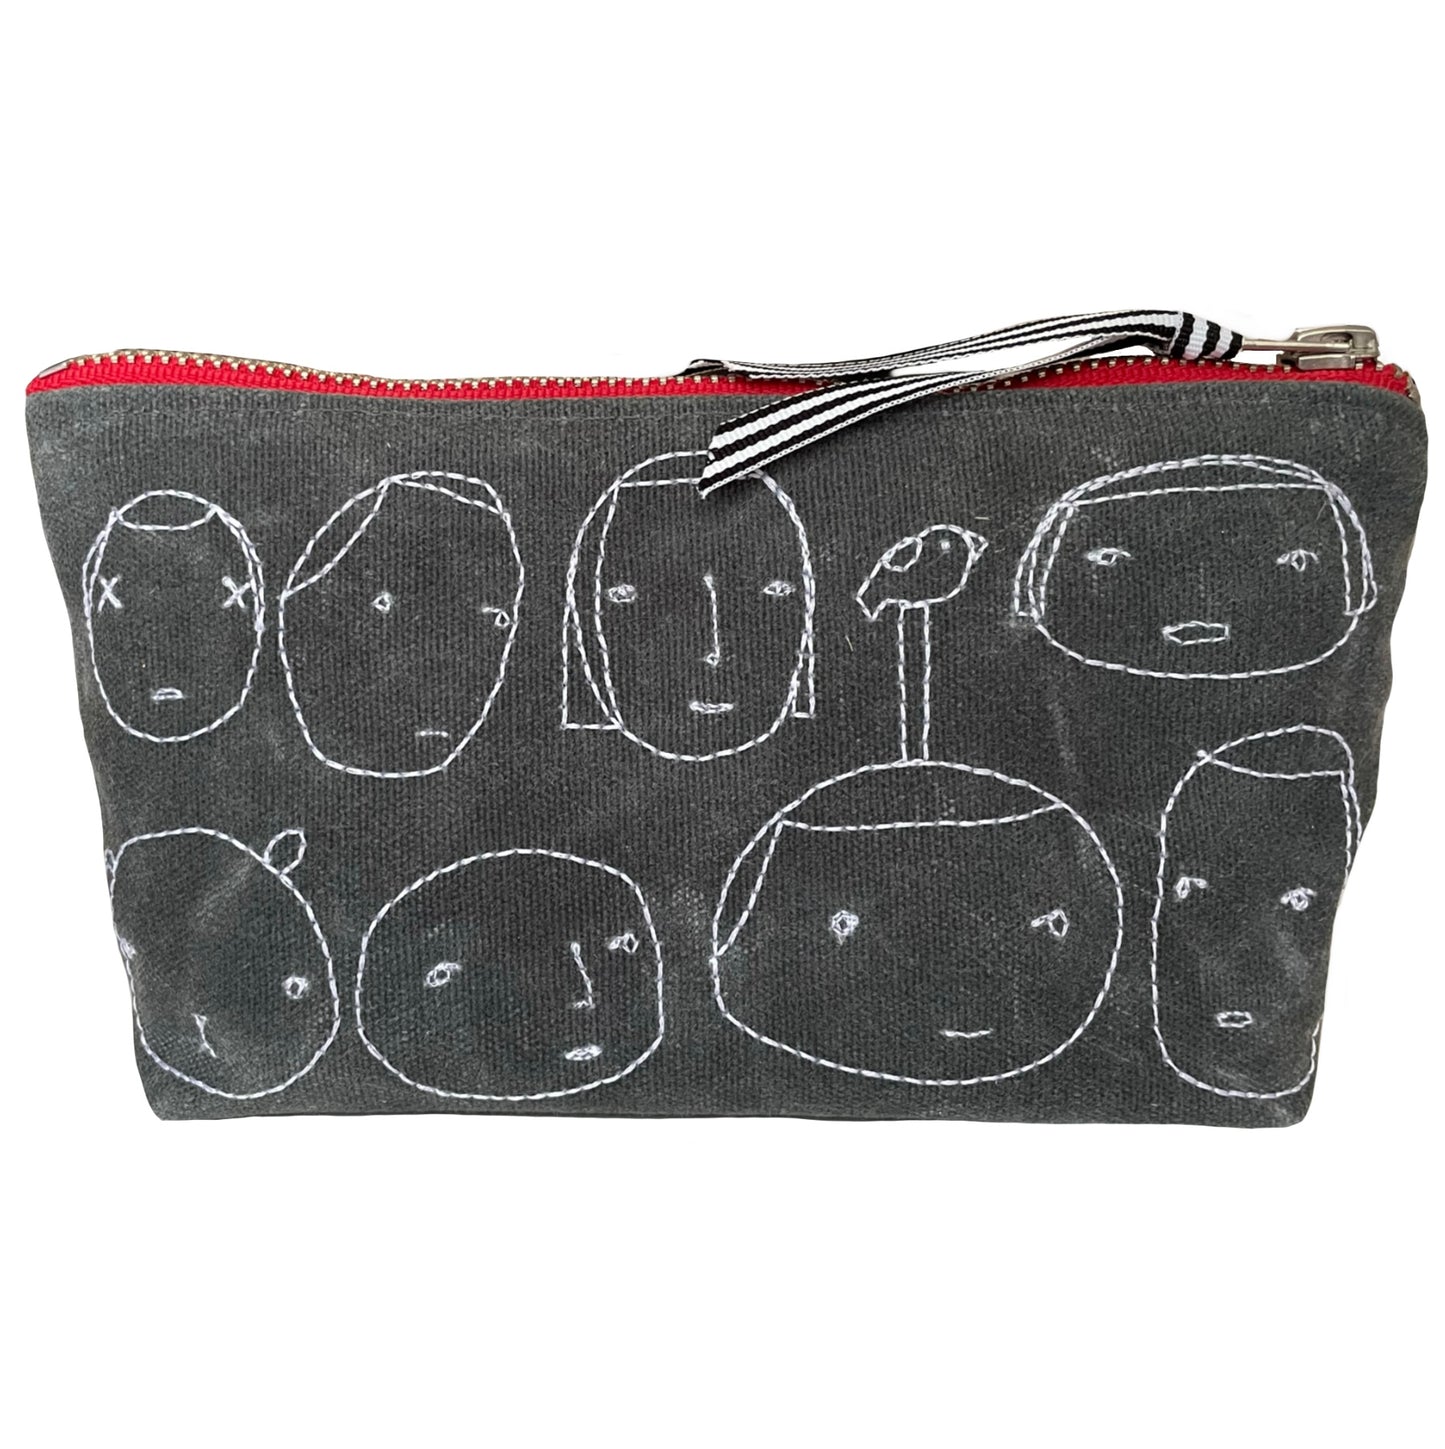 Everyday People Waxed Canvas Pouch